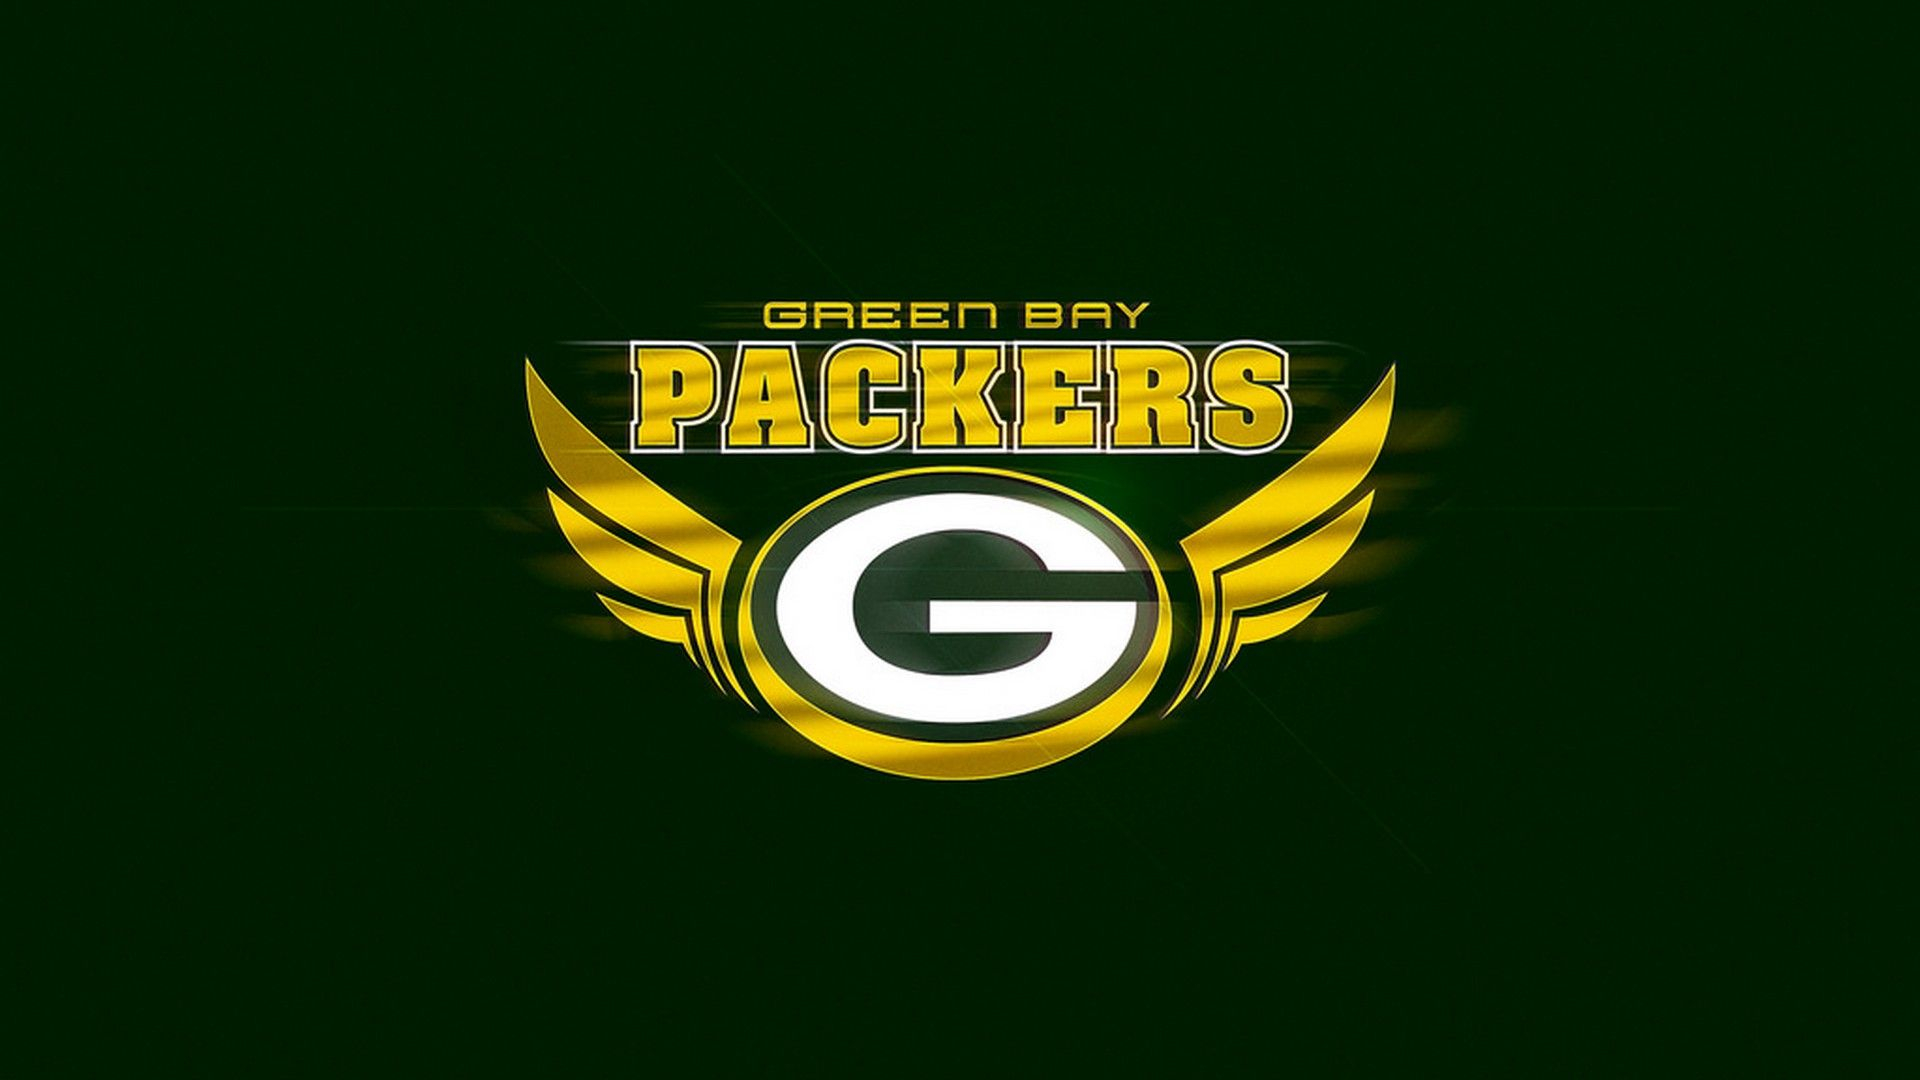 1920x1080 HD Green Bay Packers Backgrounds 2022 NFL Football Wallpapers | Green bay packers pictures, Green bay packers wallpaper, Green bay packers log